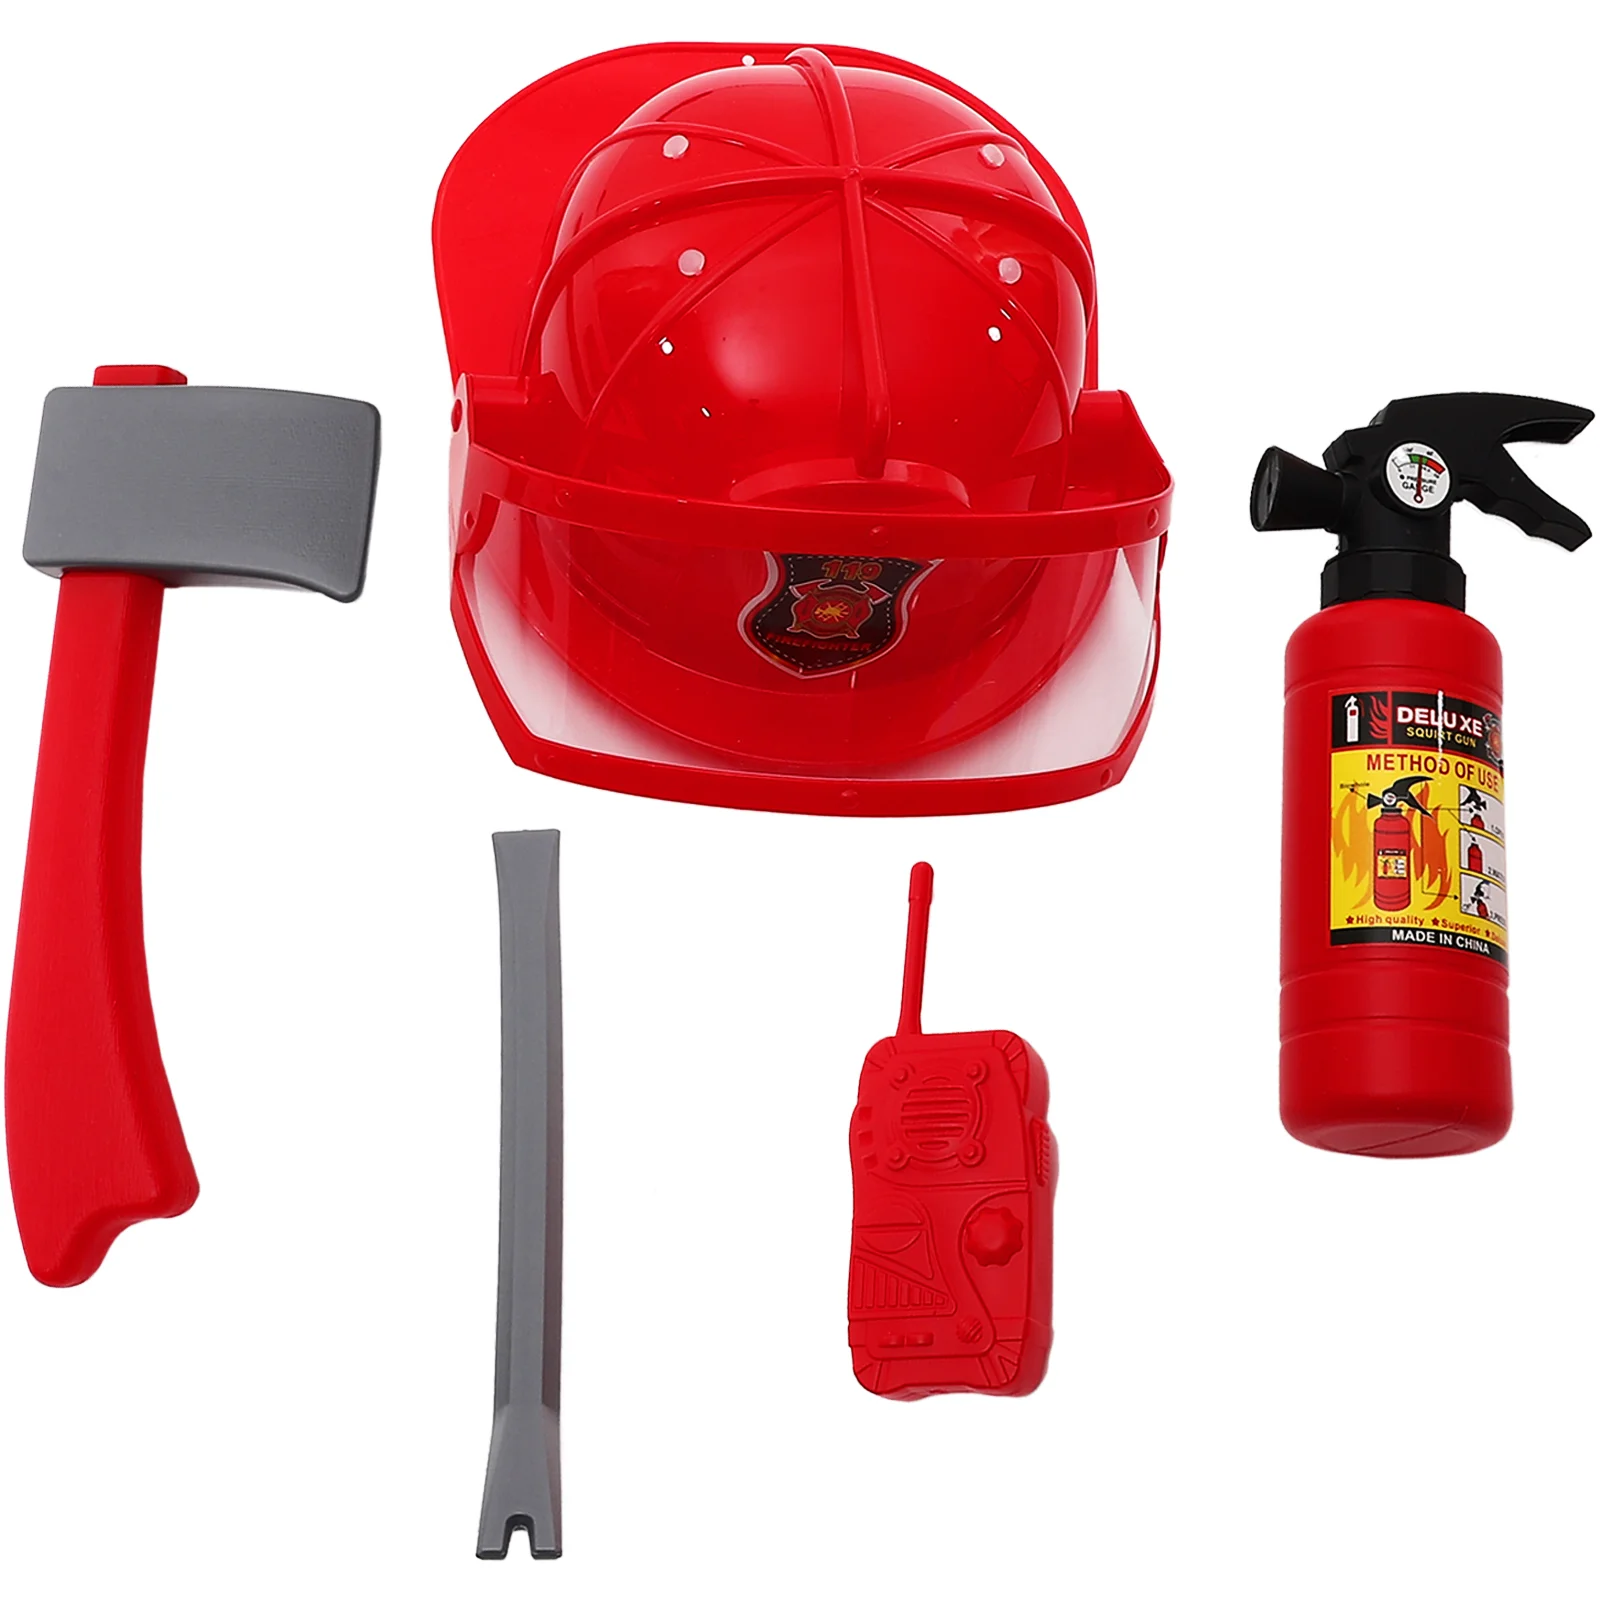 

Toddler Toys Fire Accessories Pretend Play Kids Gift Firemen Tool Kit Set Fireman Costume Cosplay Firefighter Child